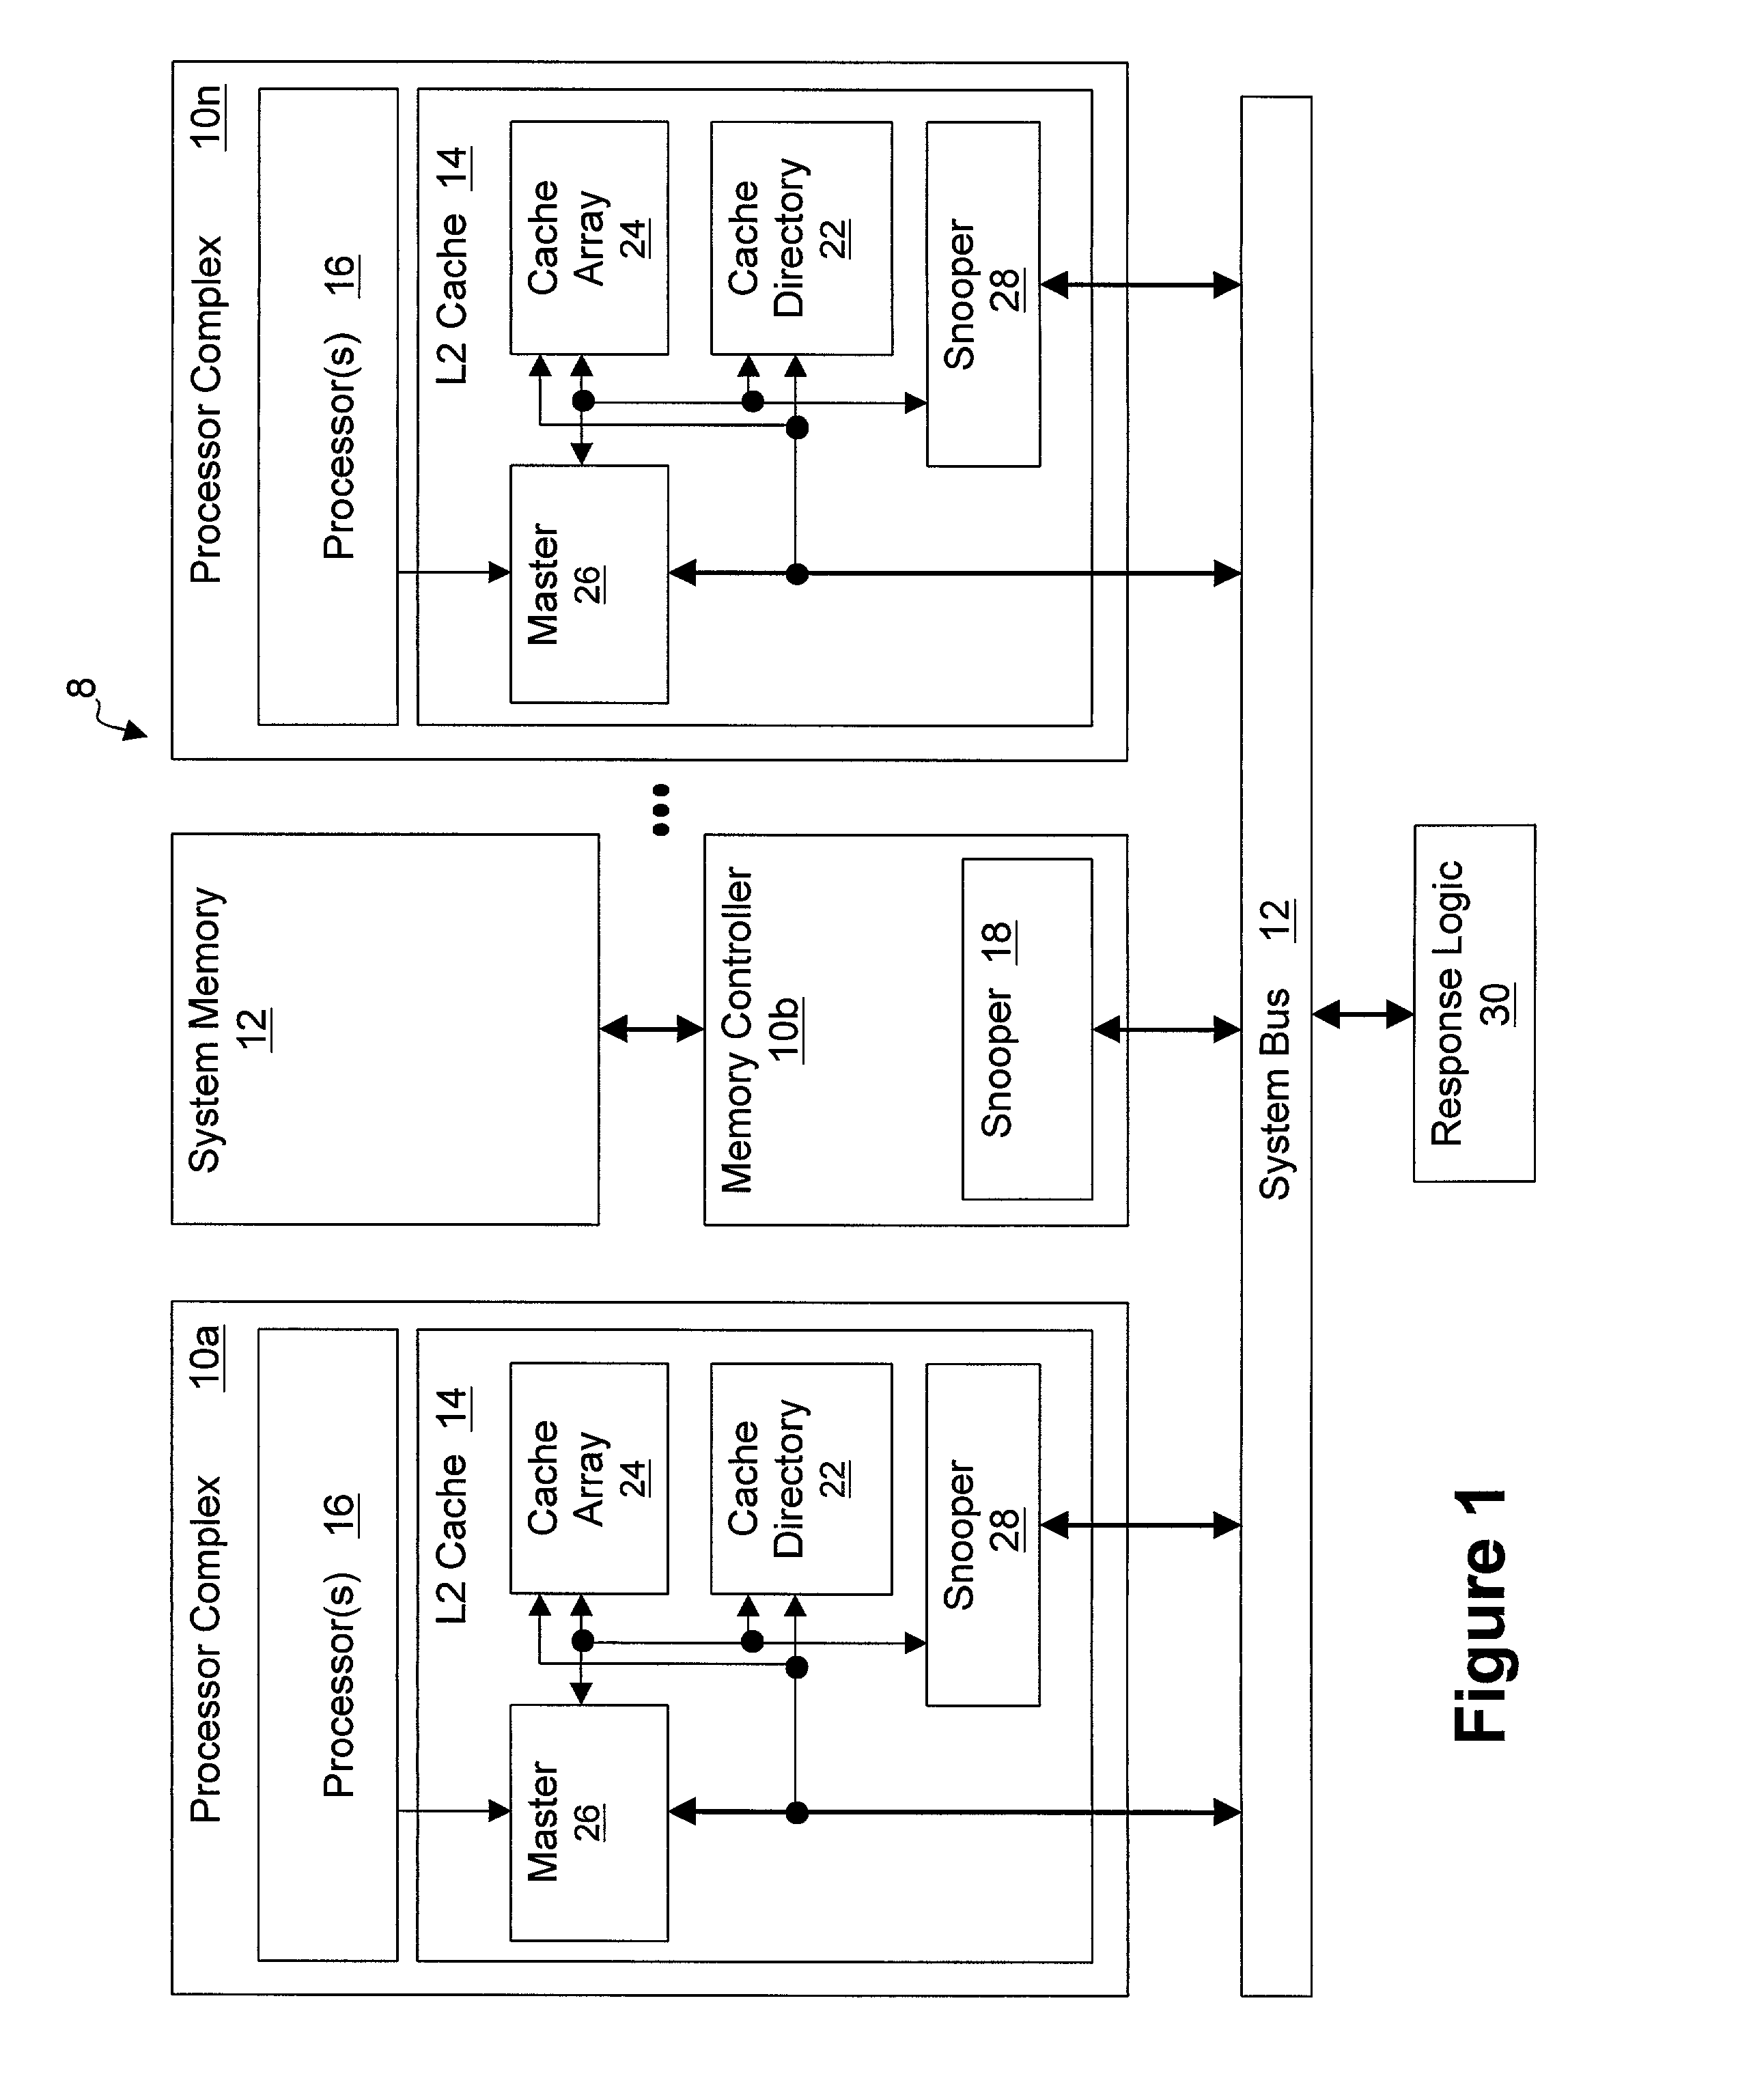 Data processing system and method for resolving a conflict between requests to modify a shared cache line